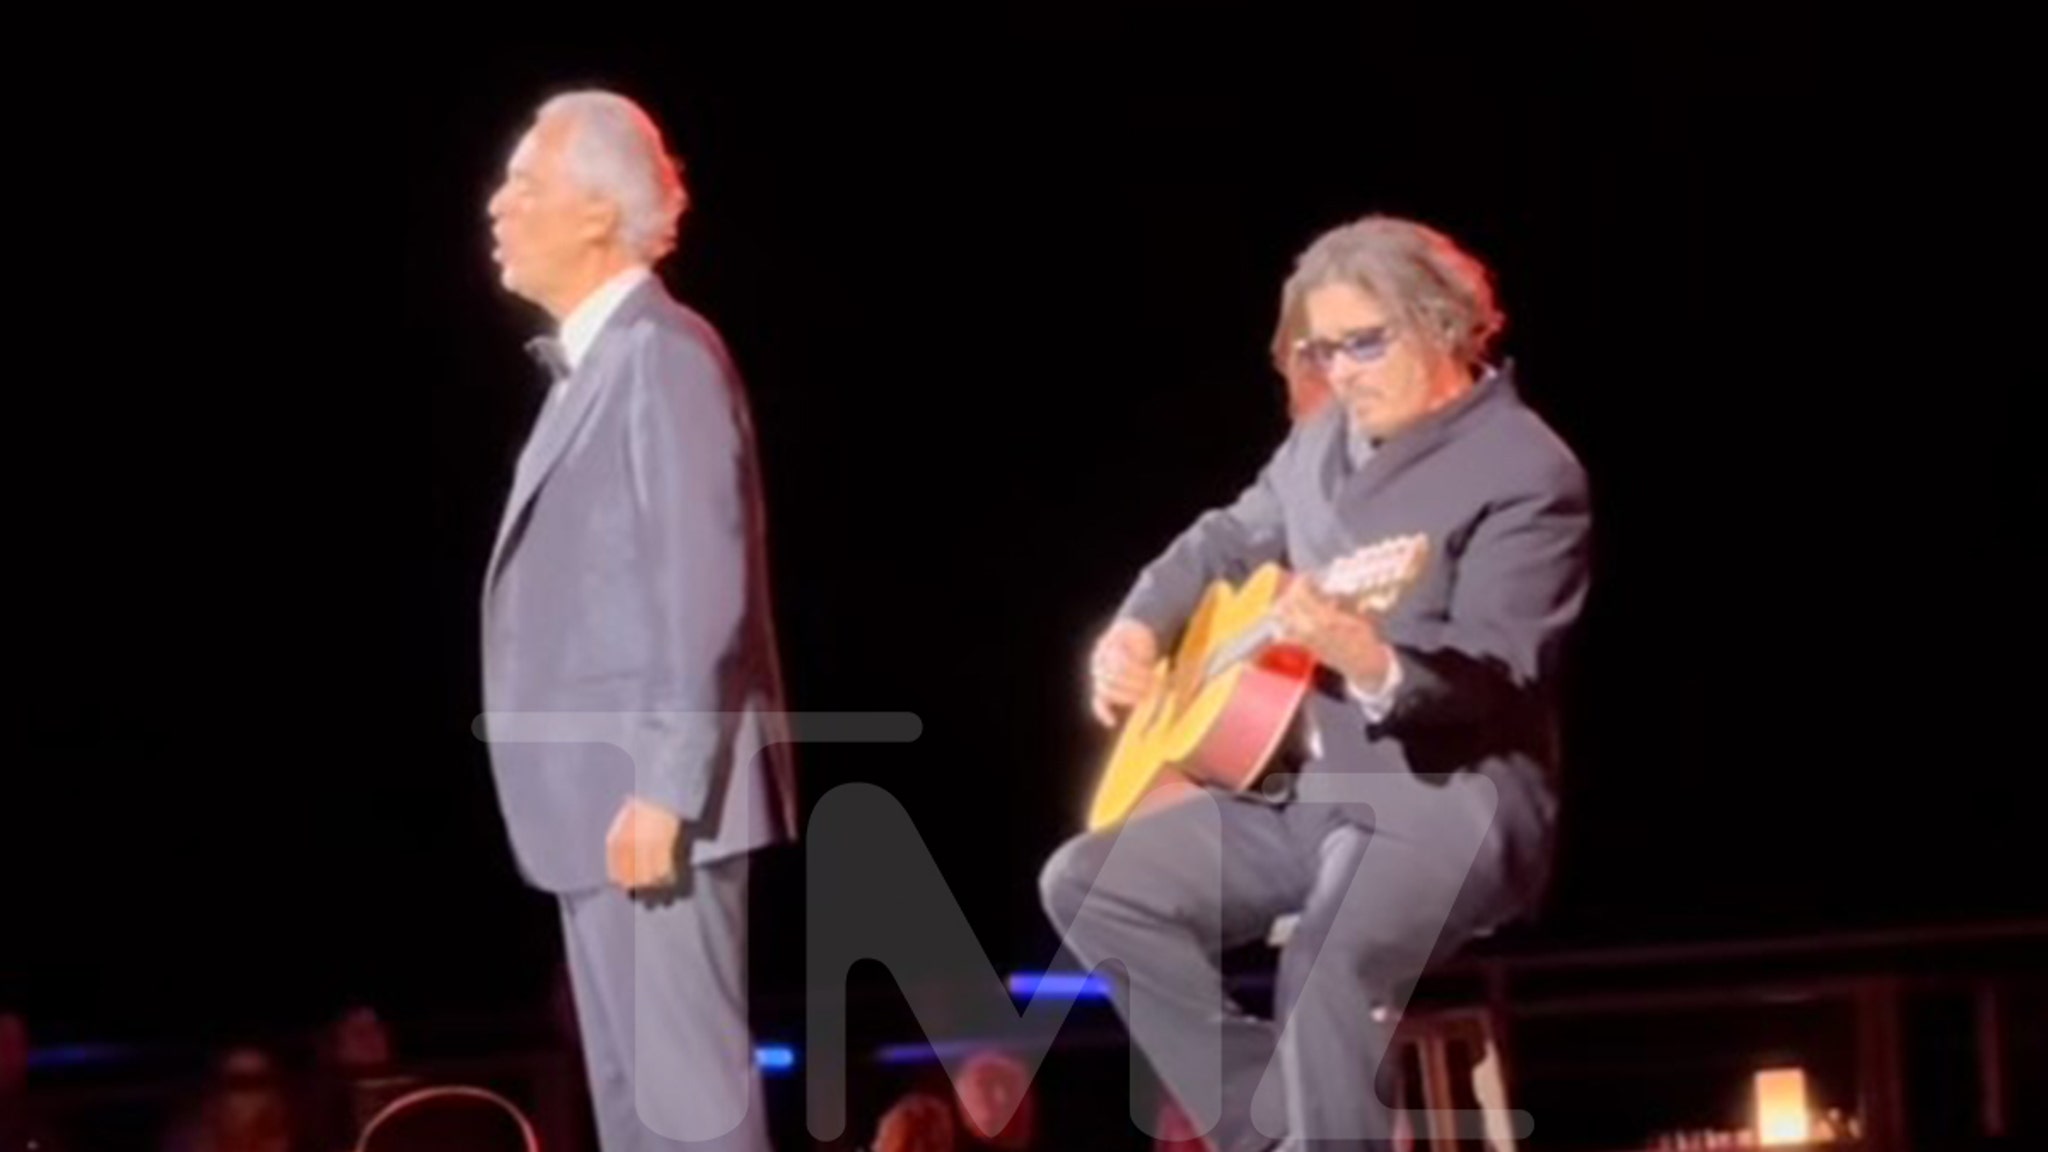 Johnny Depp Performs With Andrea Bocelli in Guitar Tribute To Jeff Beck